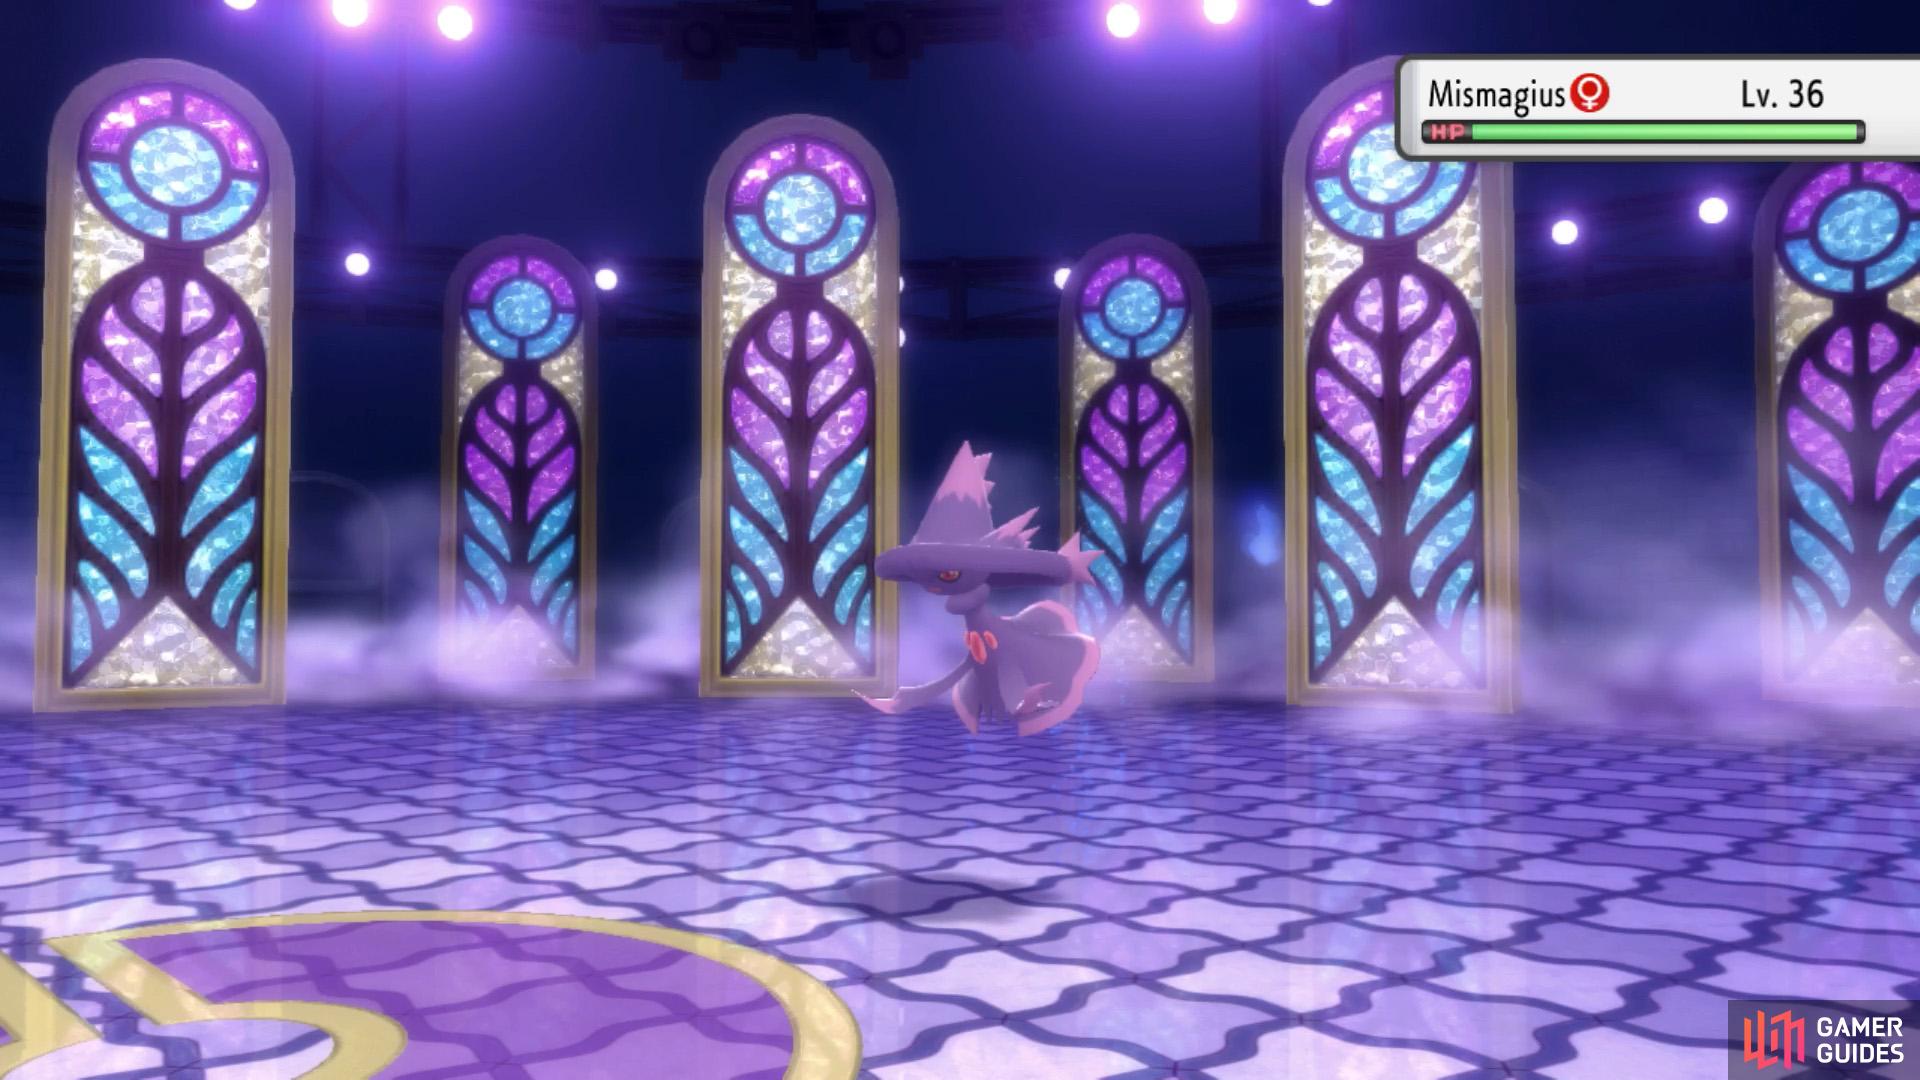 Fantina's Mismagius is equipped to deal with various threats.